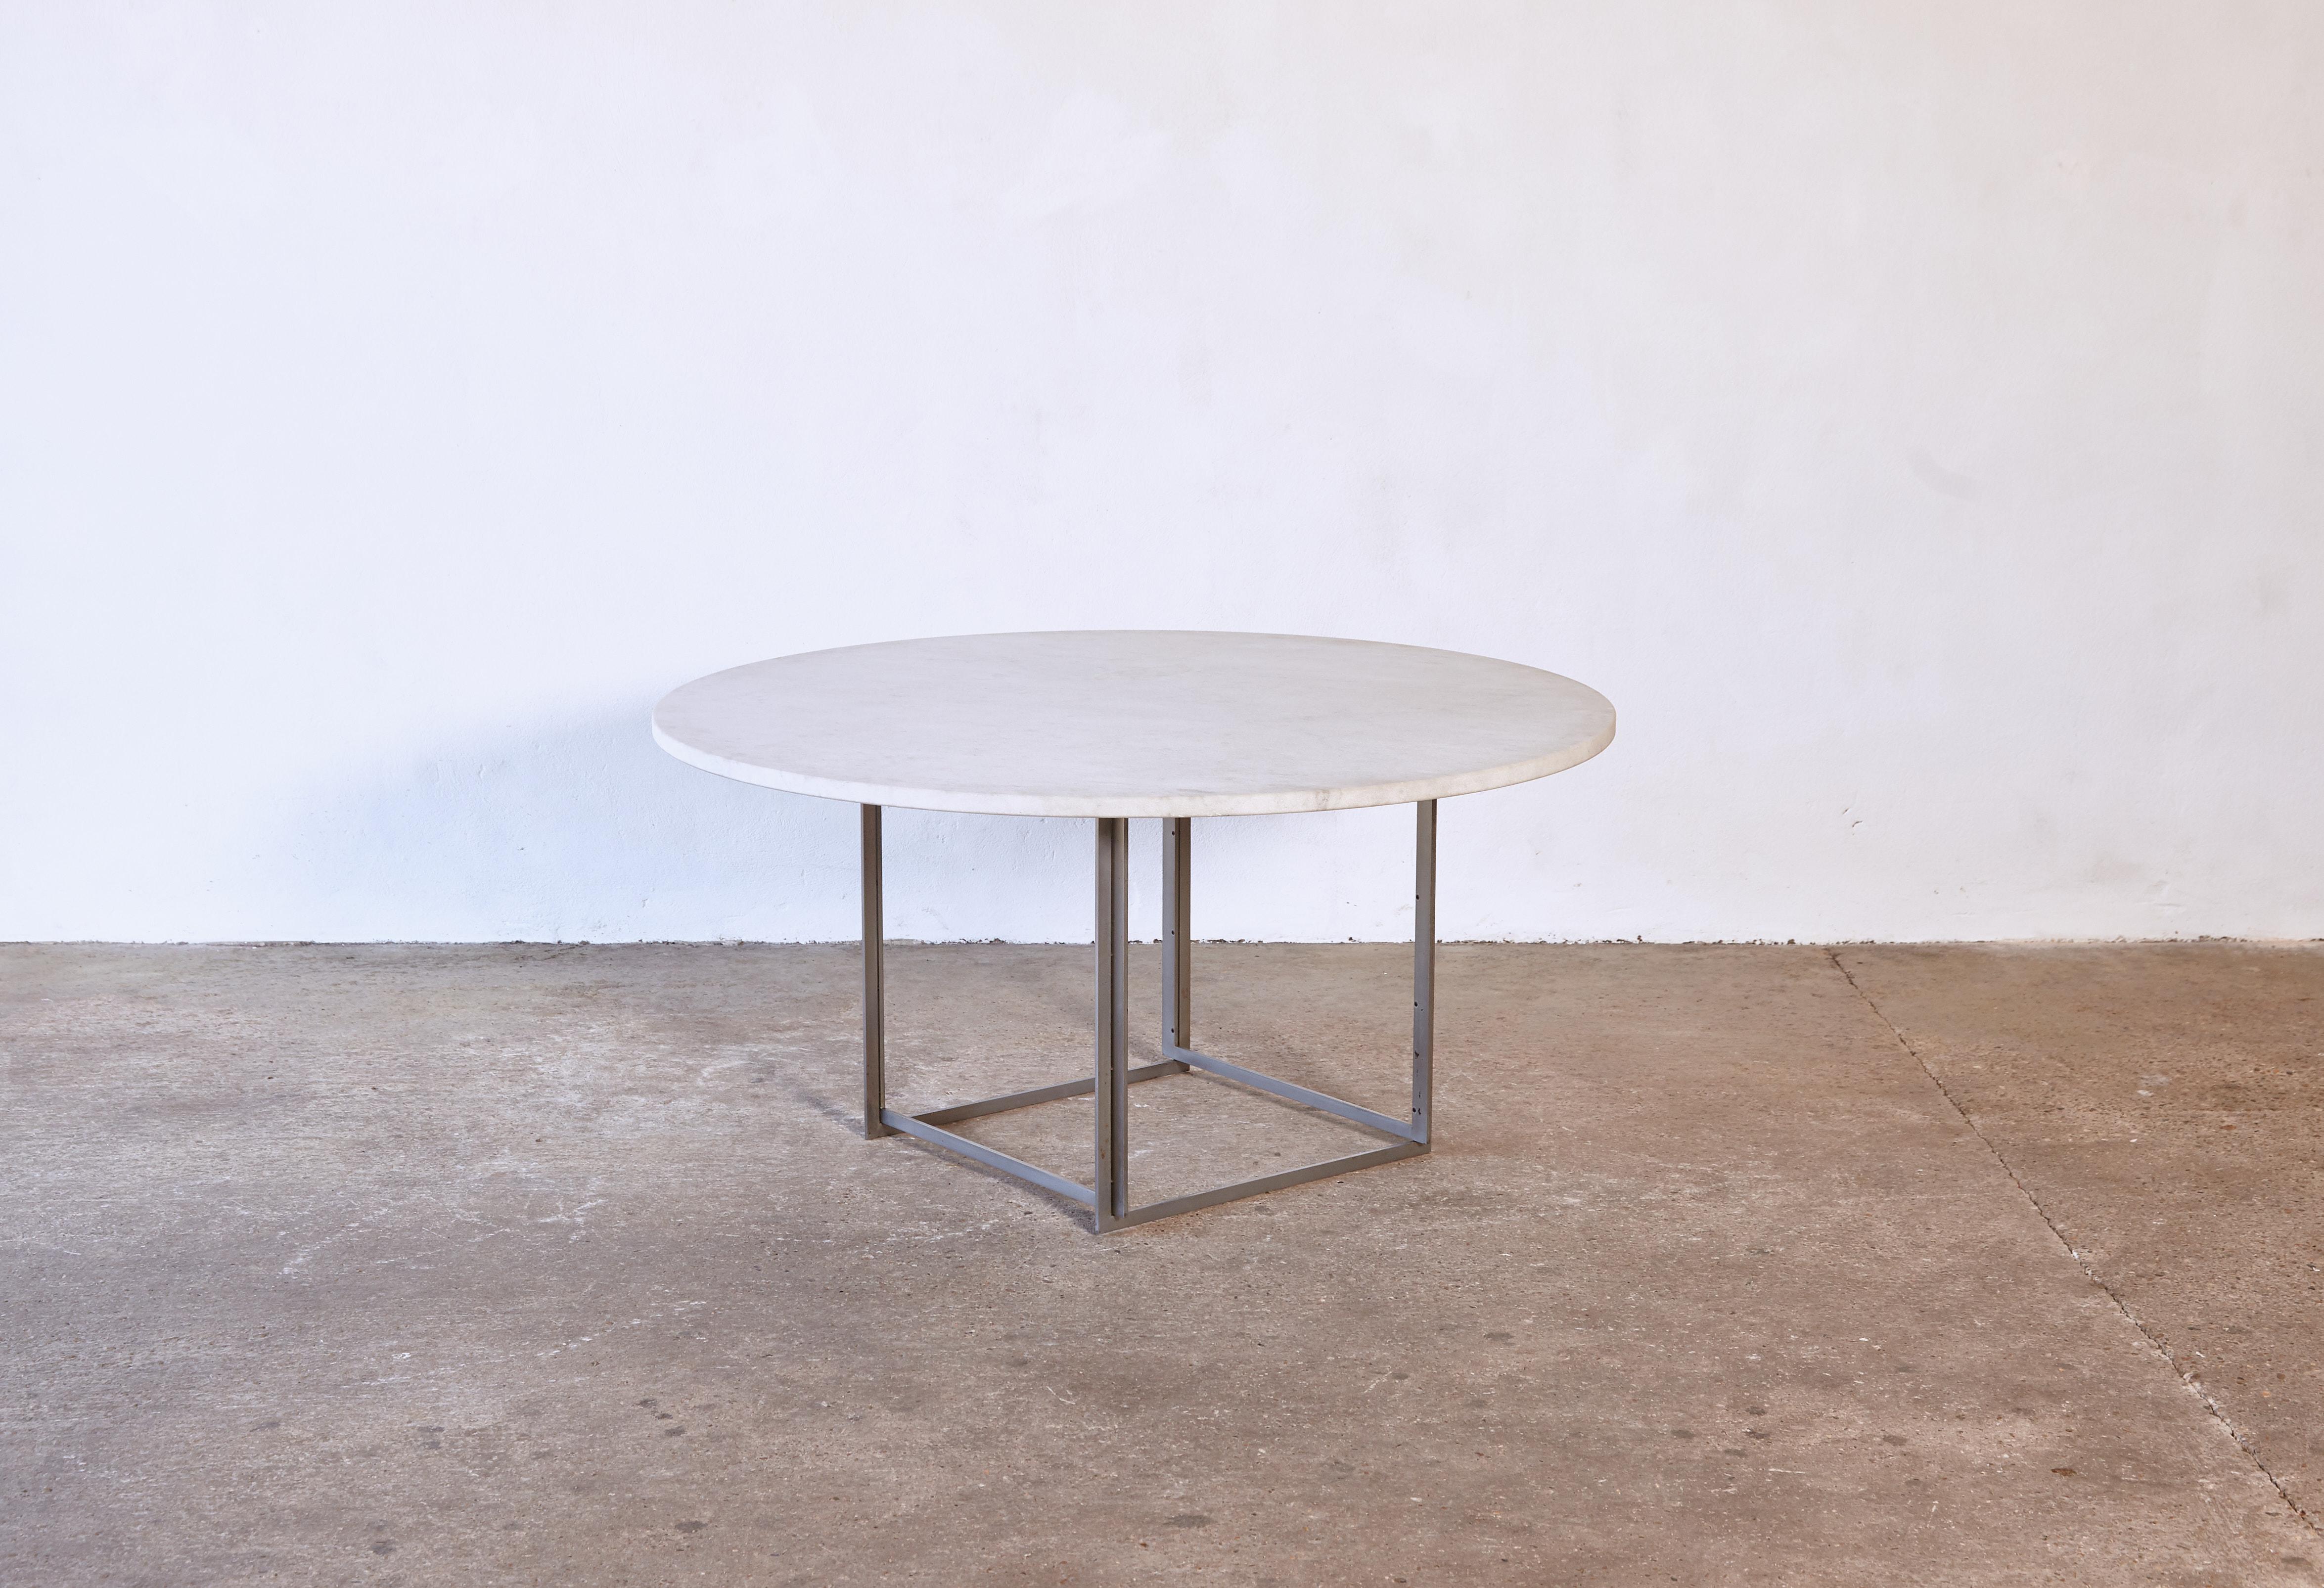 Round Poul Kjaerholm PK-54 dining table by E. Kold Christensen, Denmark, 1960s. Flint rolled Cippolino marble top and a matte chrome-plated steel base. Stampled with EKC makers mark. A removable wooden riser has been added under the table top to add